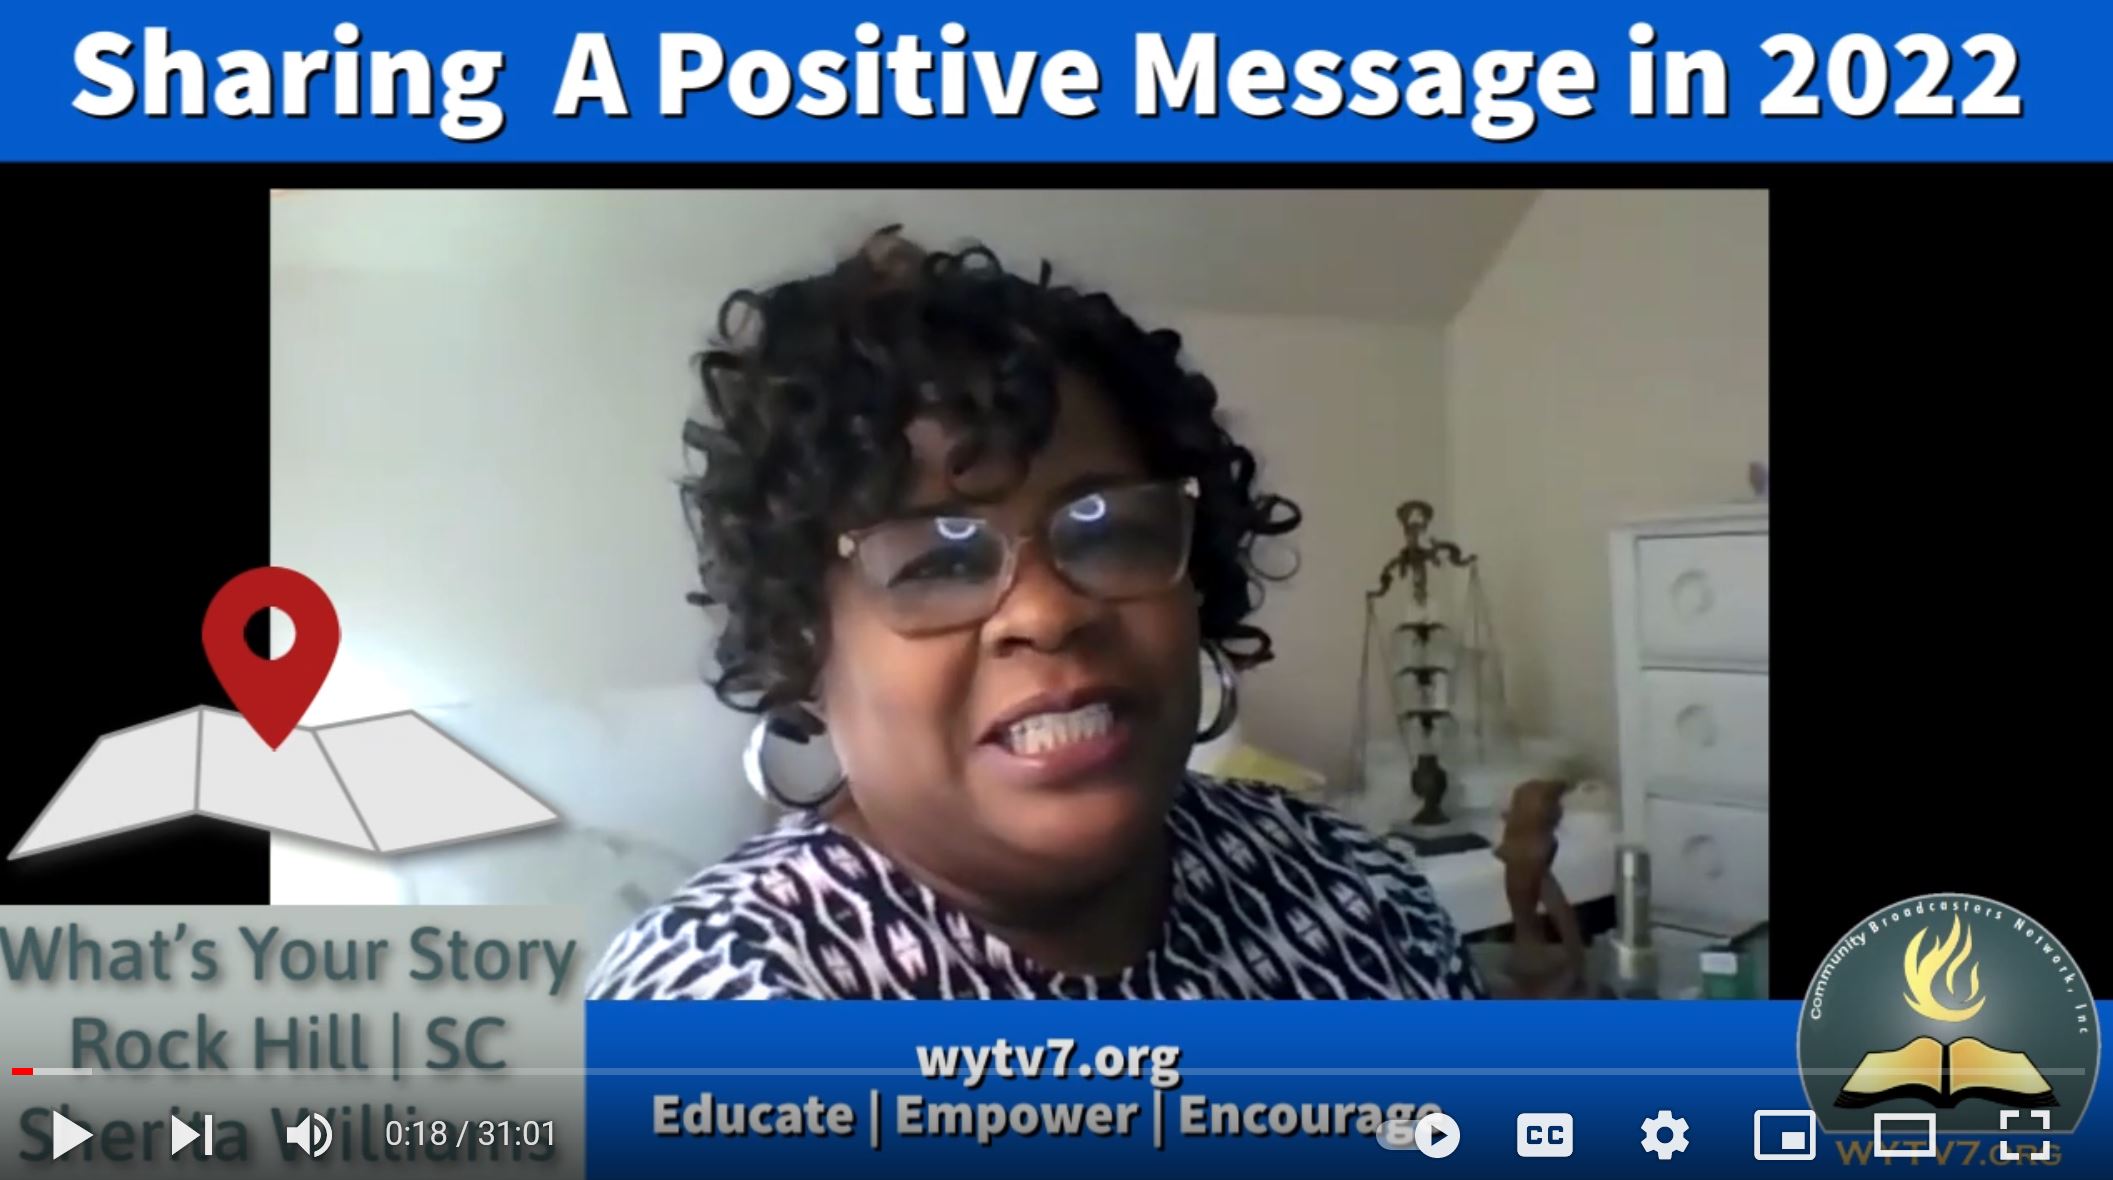 WYTV7 What's your Story:  Sharing a Positive Message in 2022:  Jan 20, 2022